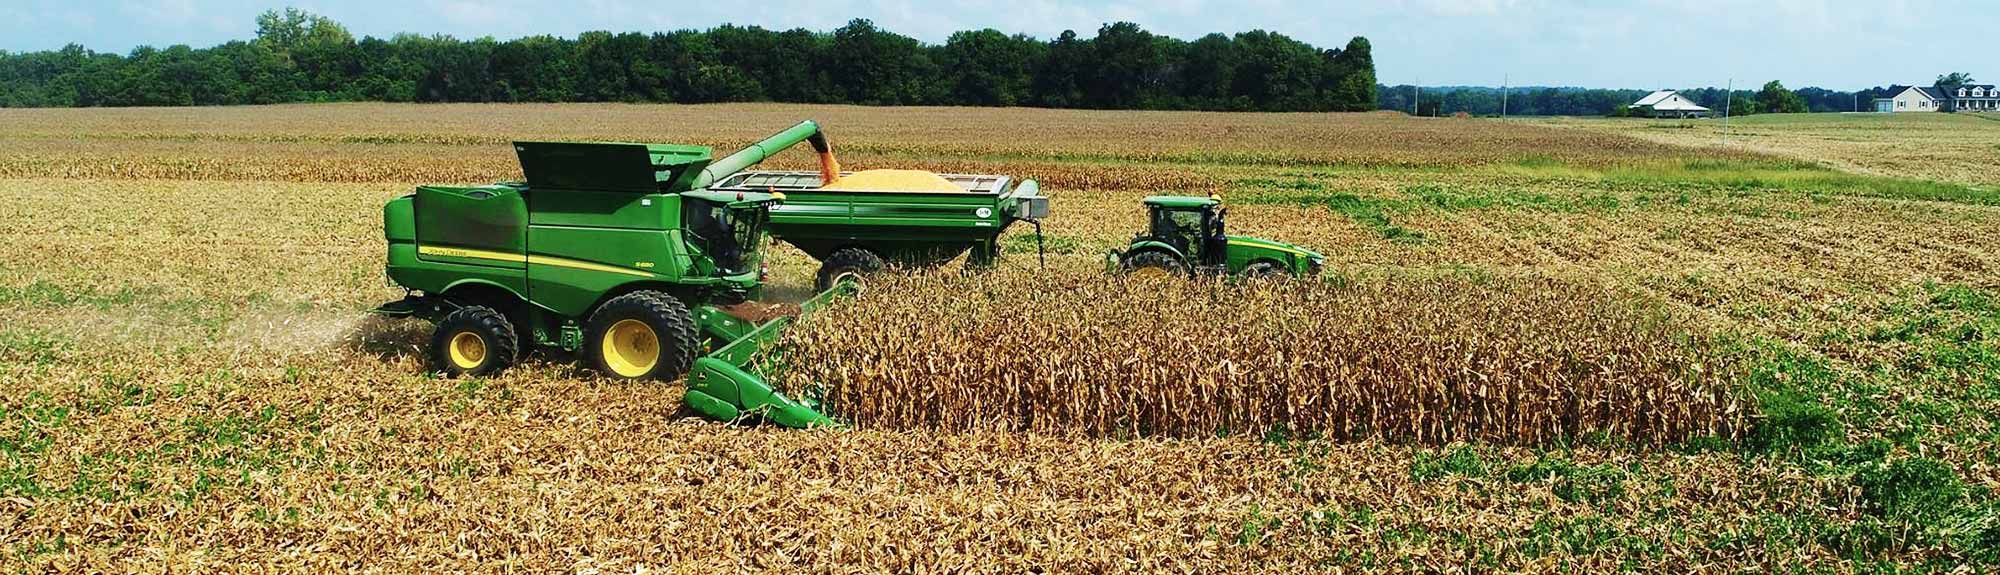 Anson Family Farms corn and soybean operation